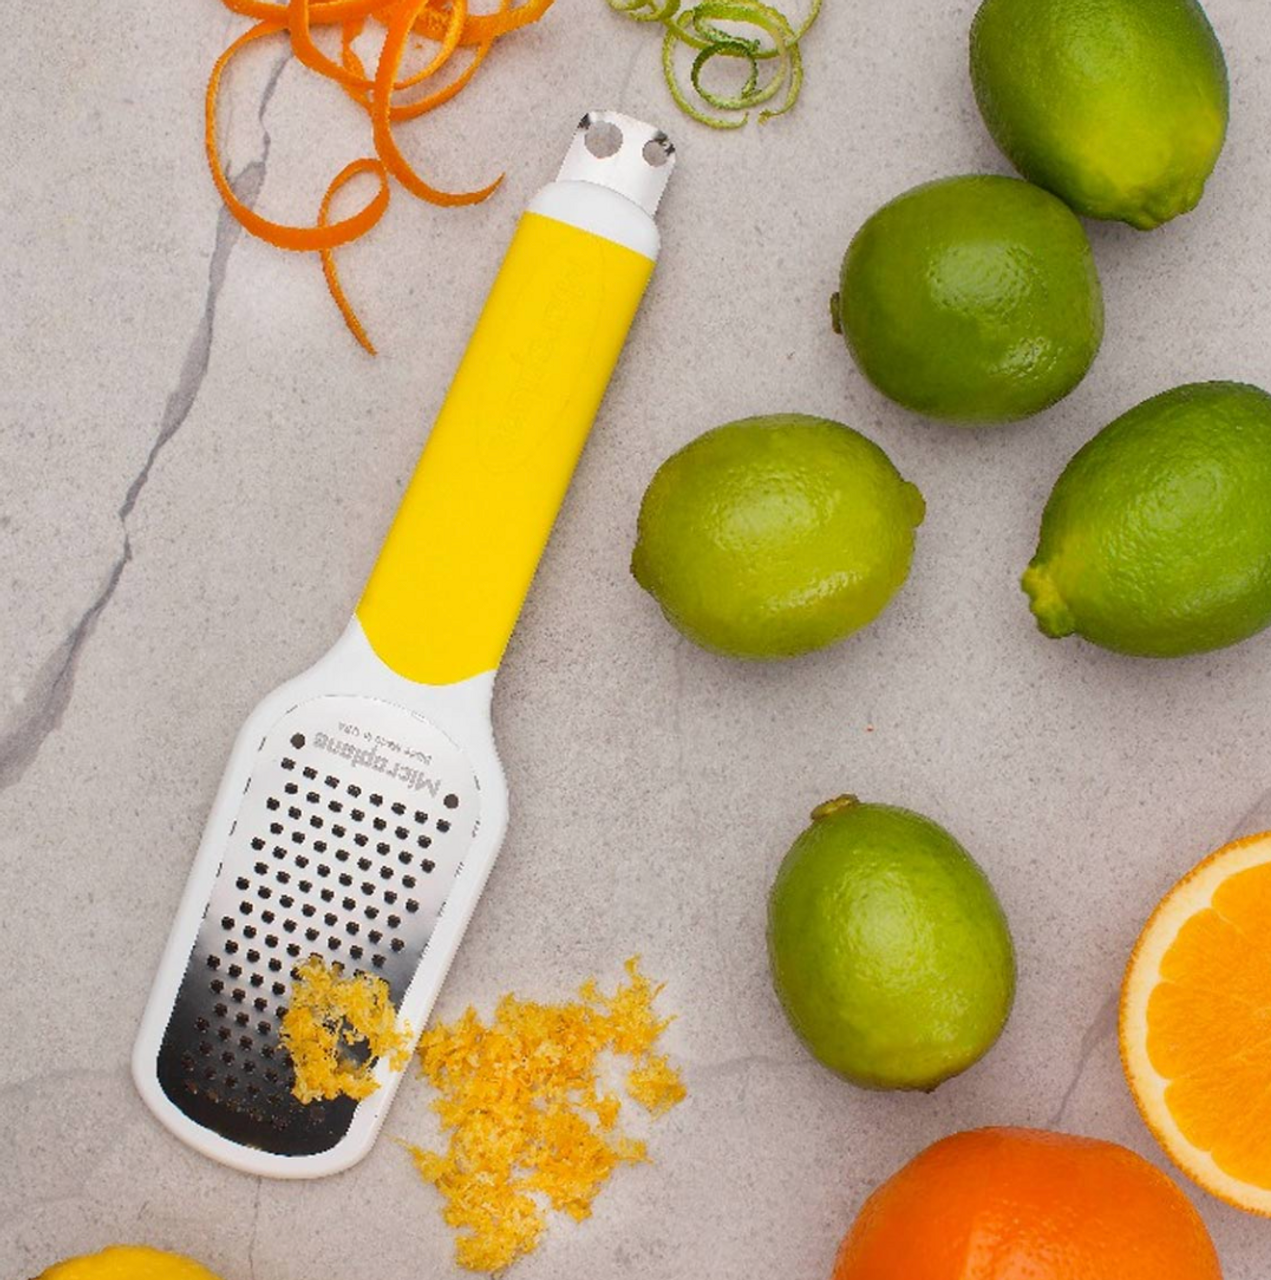 Microplane Graters & Utility Zesters